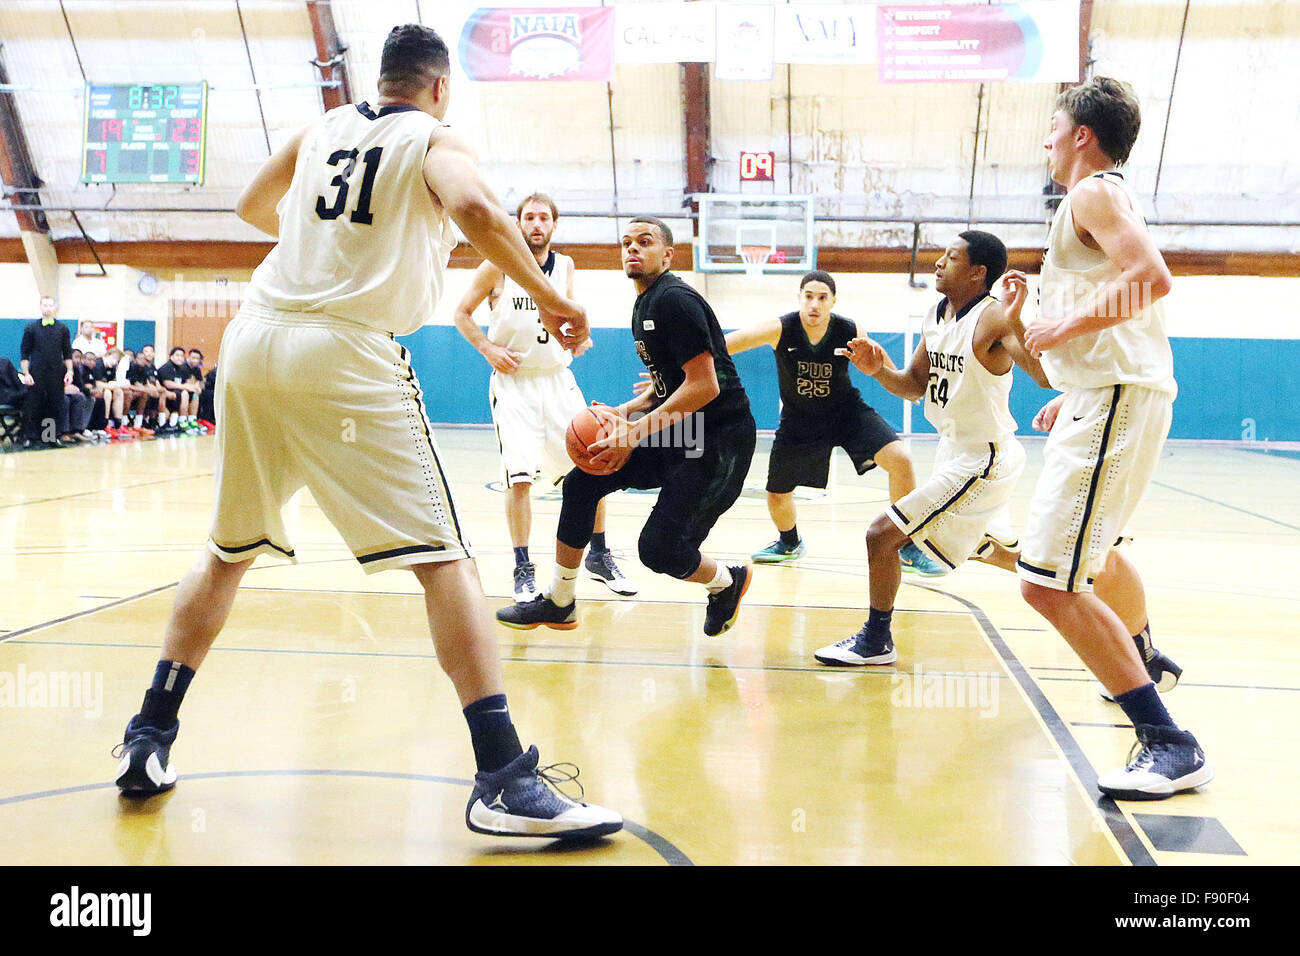 Angwin, CA, USA. 11th Dec, 2015. Pacific Union College's Mike Hill drives towards the basket during the Pioneers game against Johnson & Wales University at Pacific Union College in Angwin on Friday. © Napa Valley Register/ZUMA Wire/Alamy Live News Stock Photo